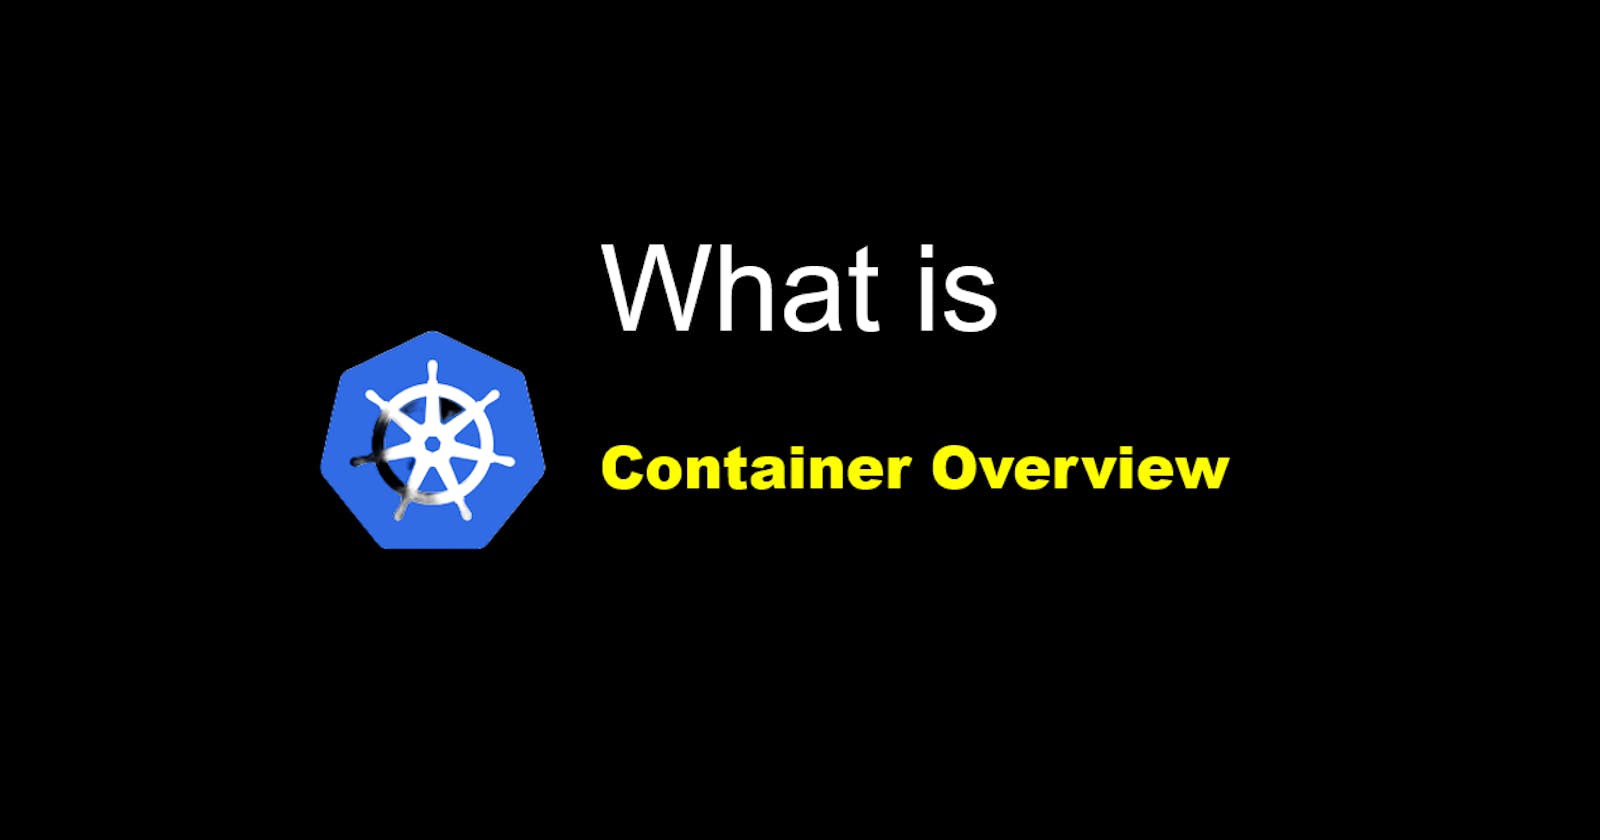 Kubernetes Overview - Container Overview